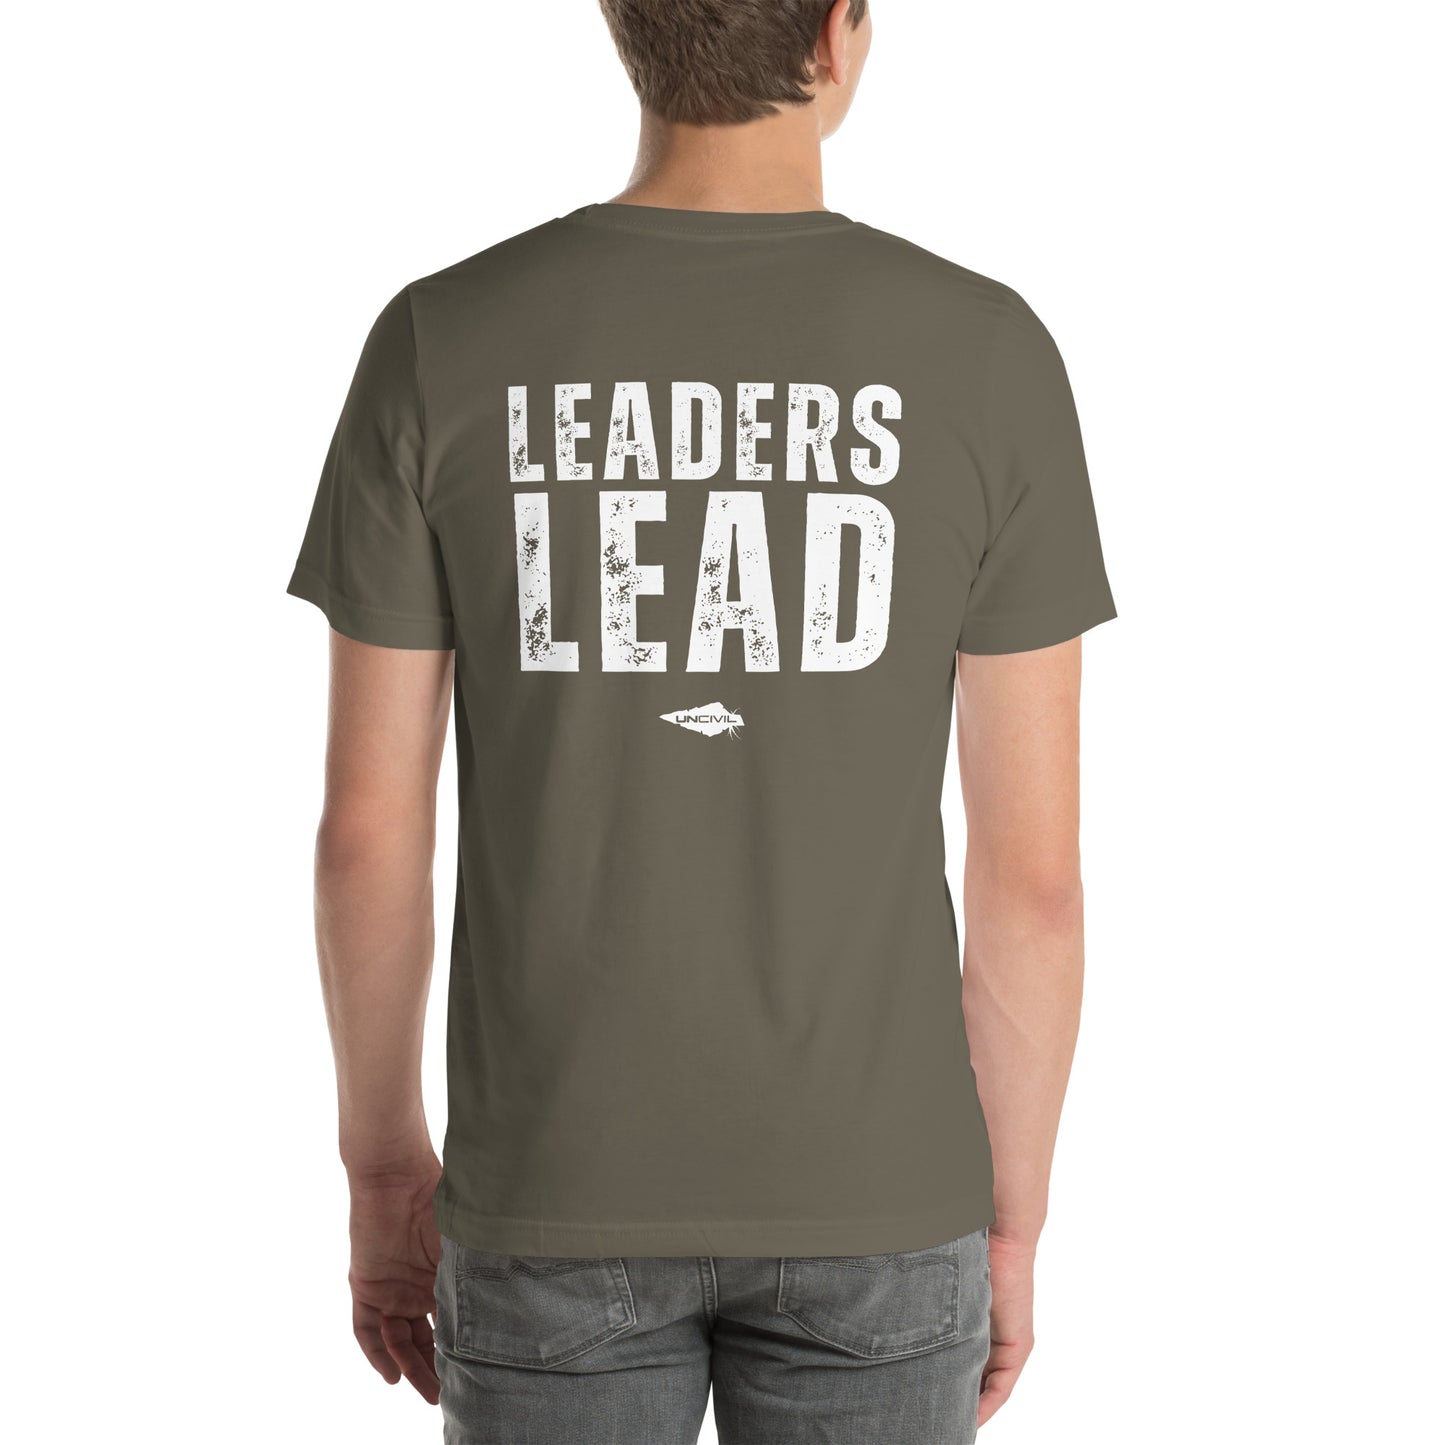 Leaders Lead Army Green t-shirt - men's motivational shirts